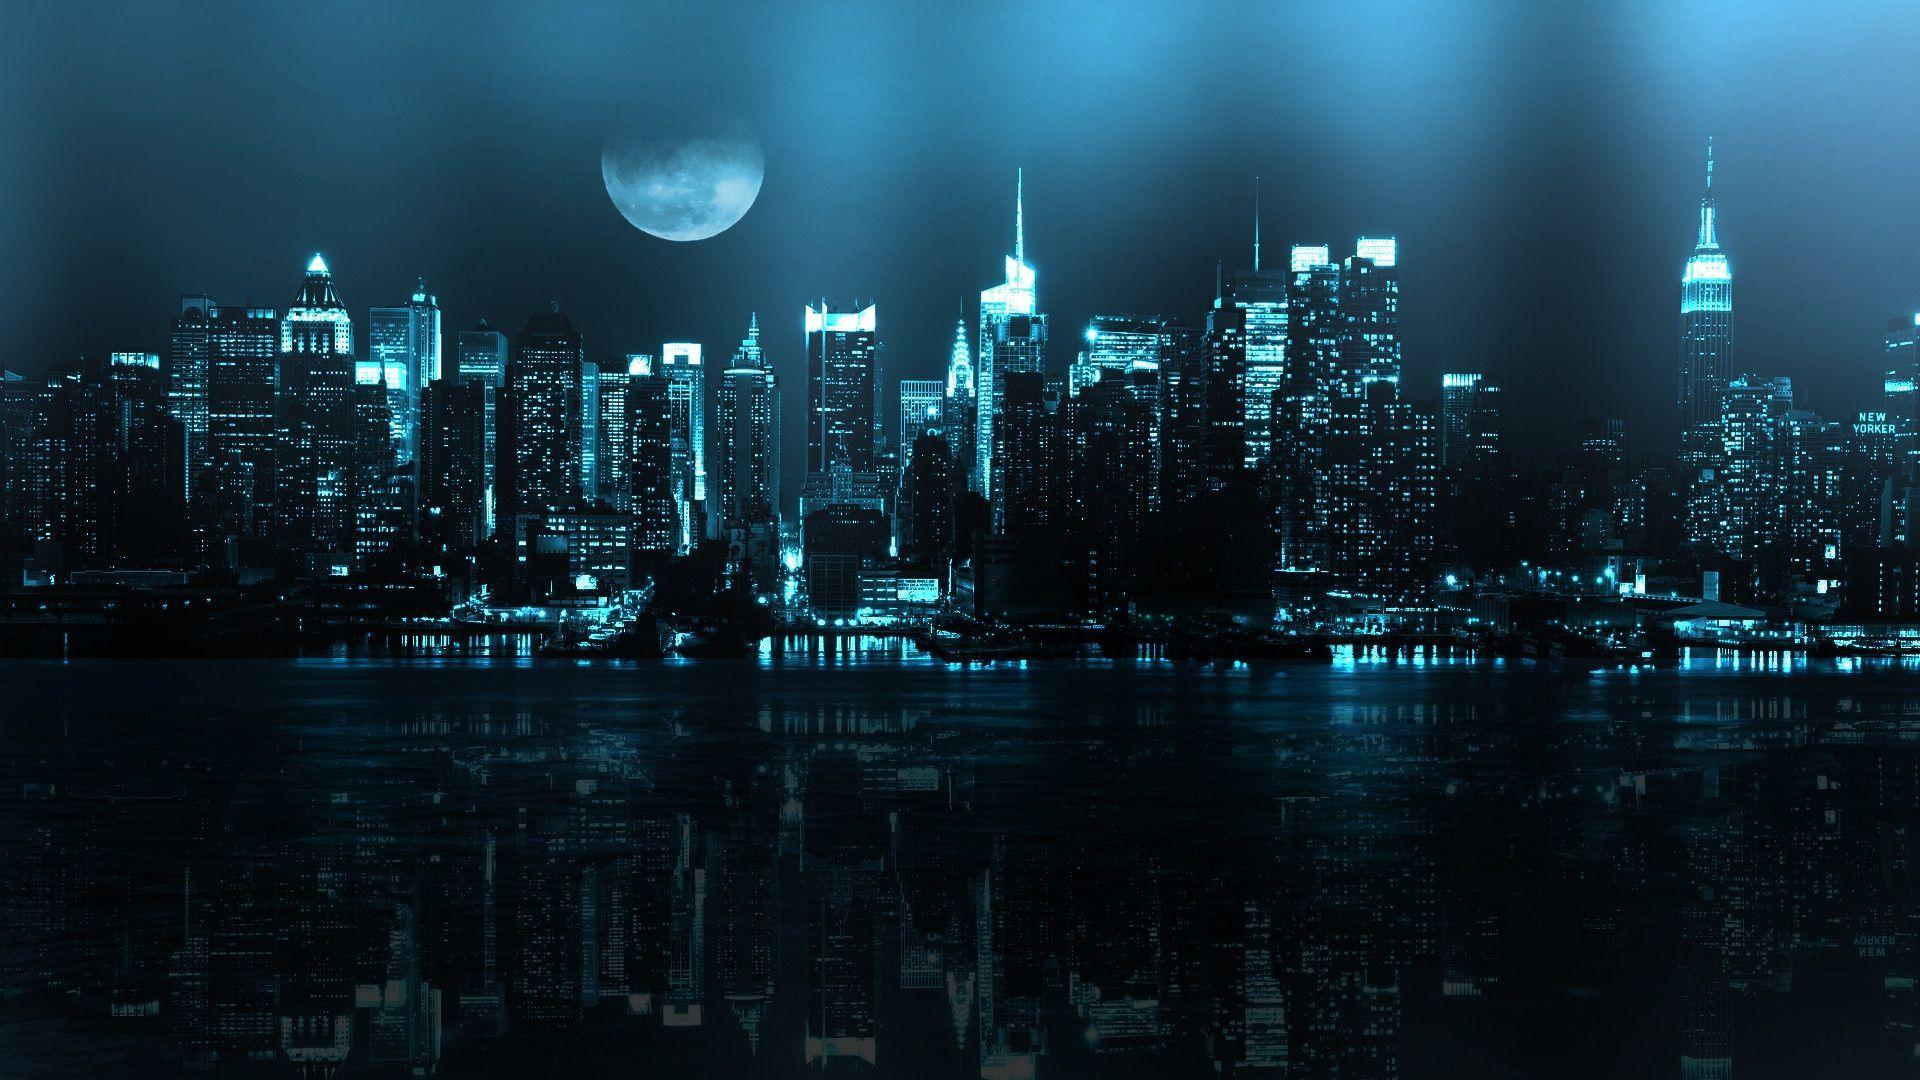 awesome city wallpaper 1920x1080. High Quality Resolutions